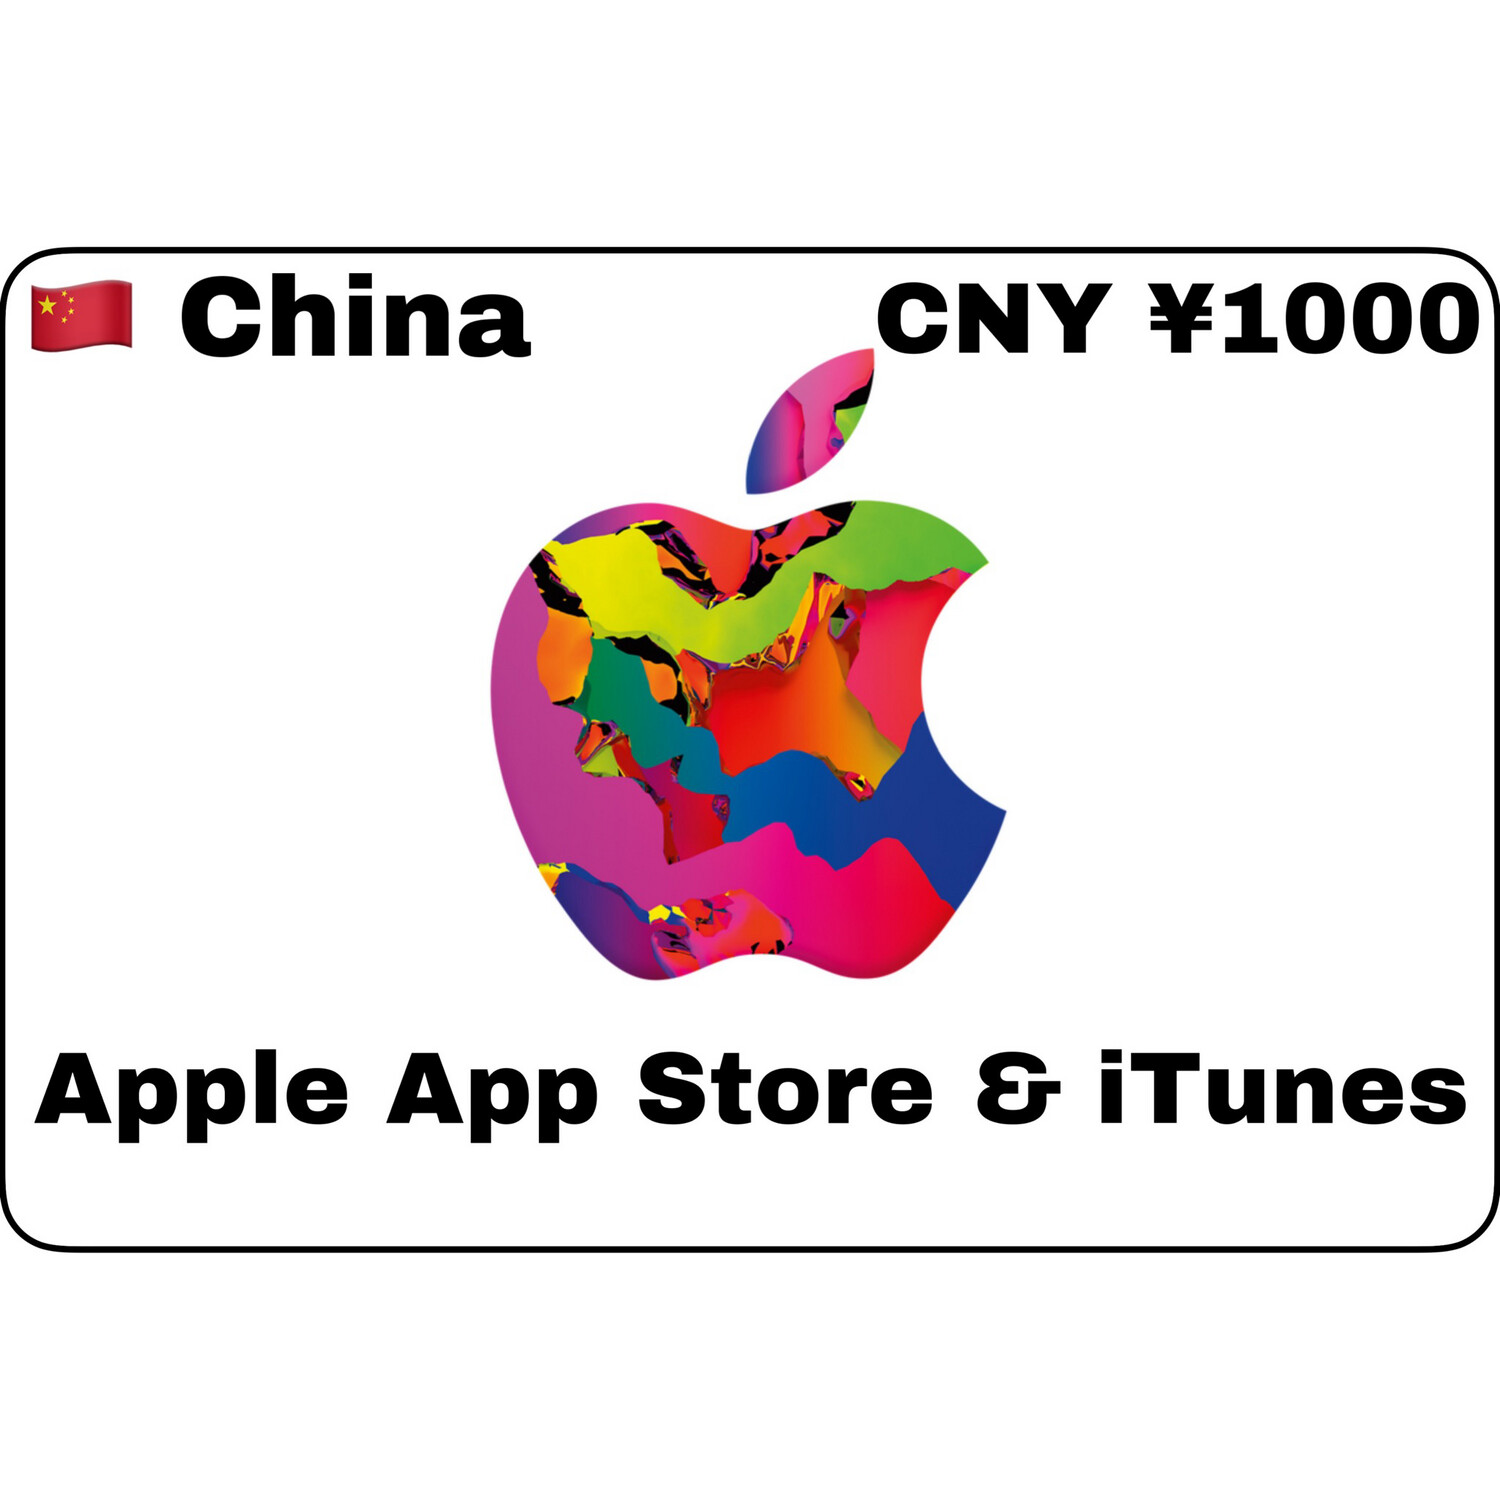 Apple iTunes Gift Card China CNY ¥1000